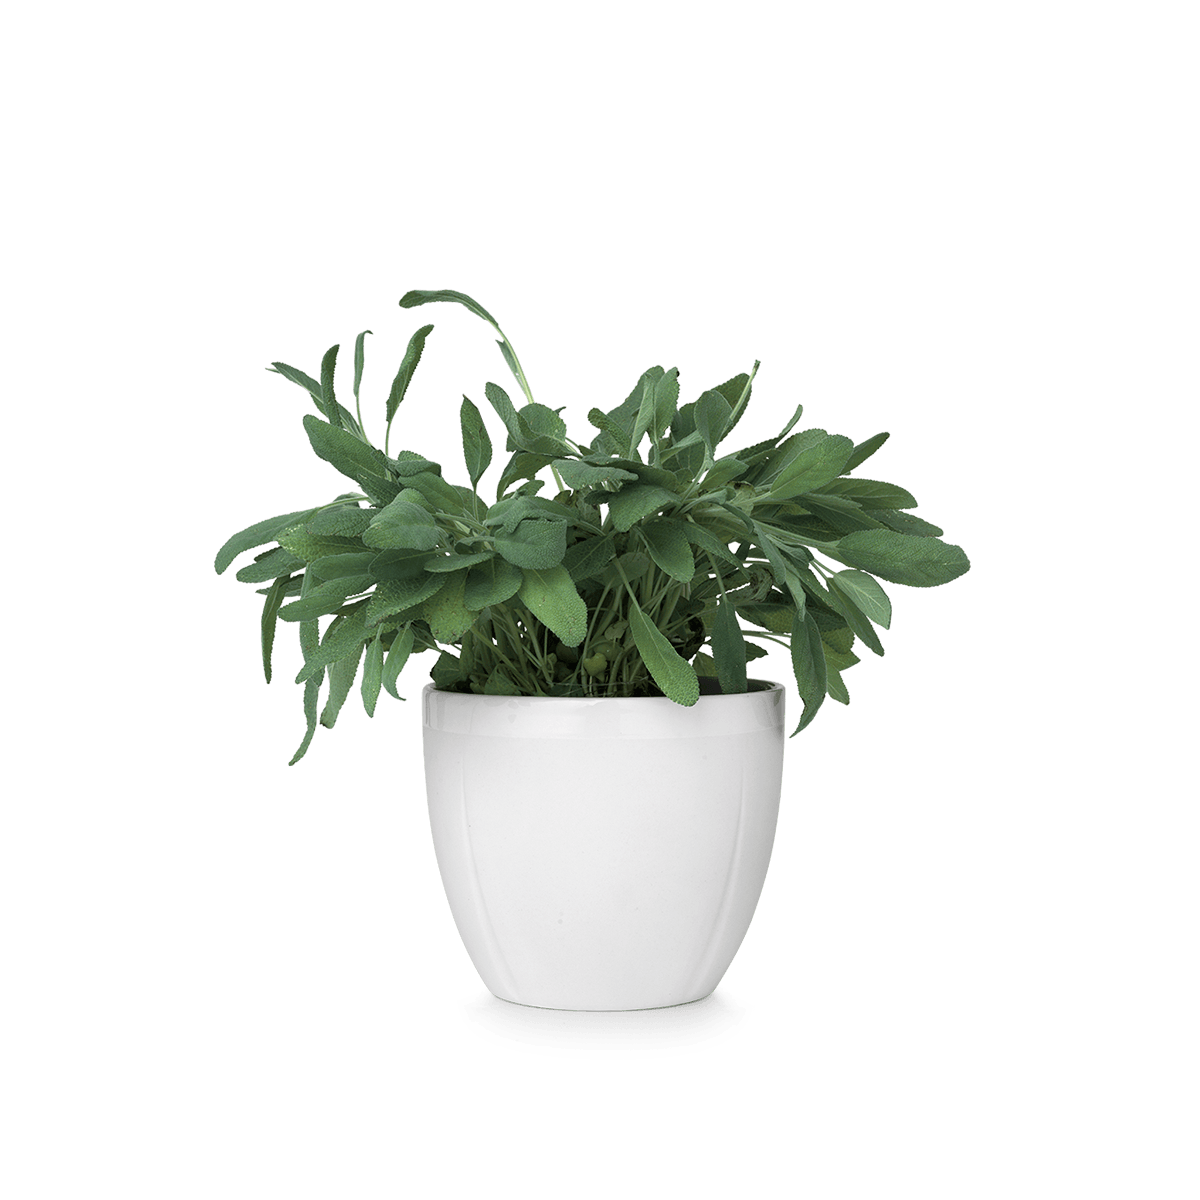 Small Pot Flower HD Image Free PNG Image